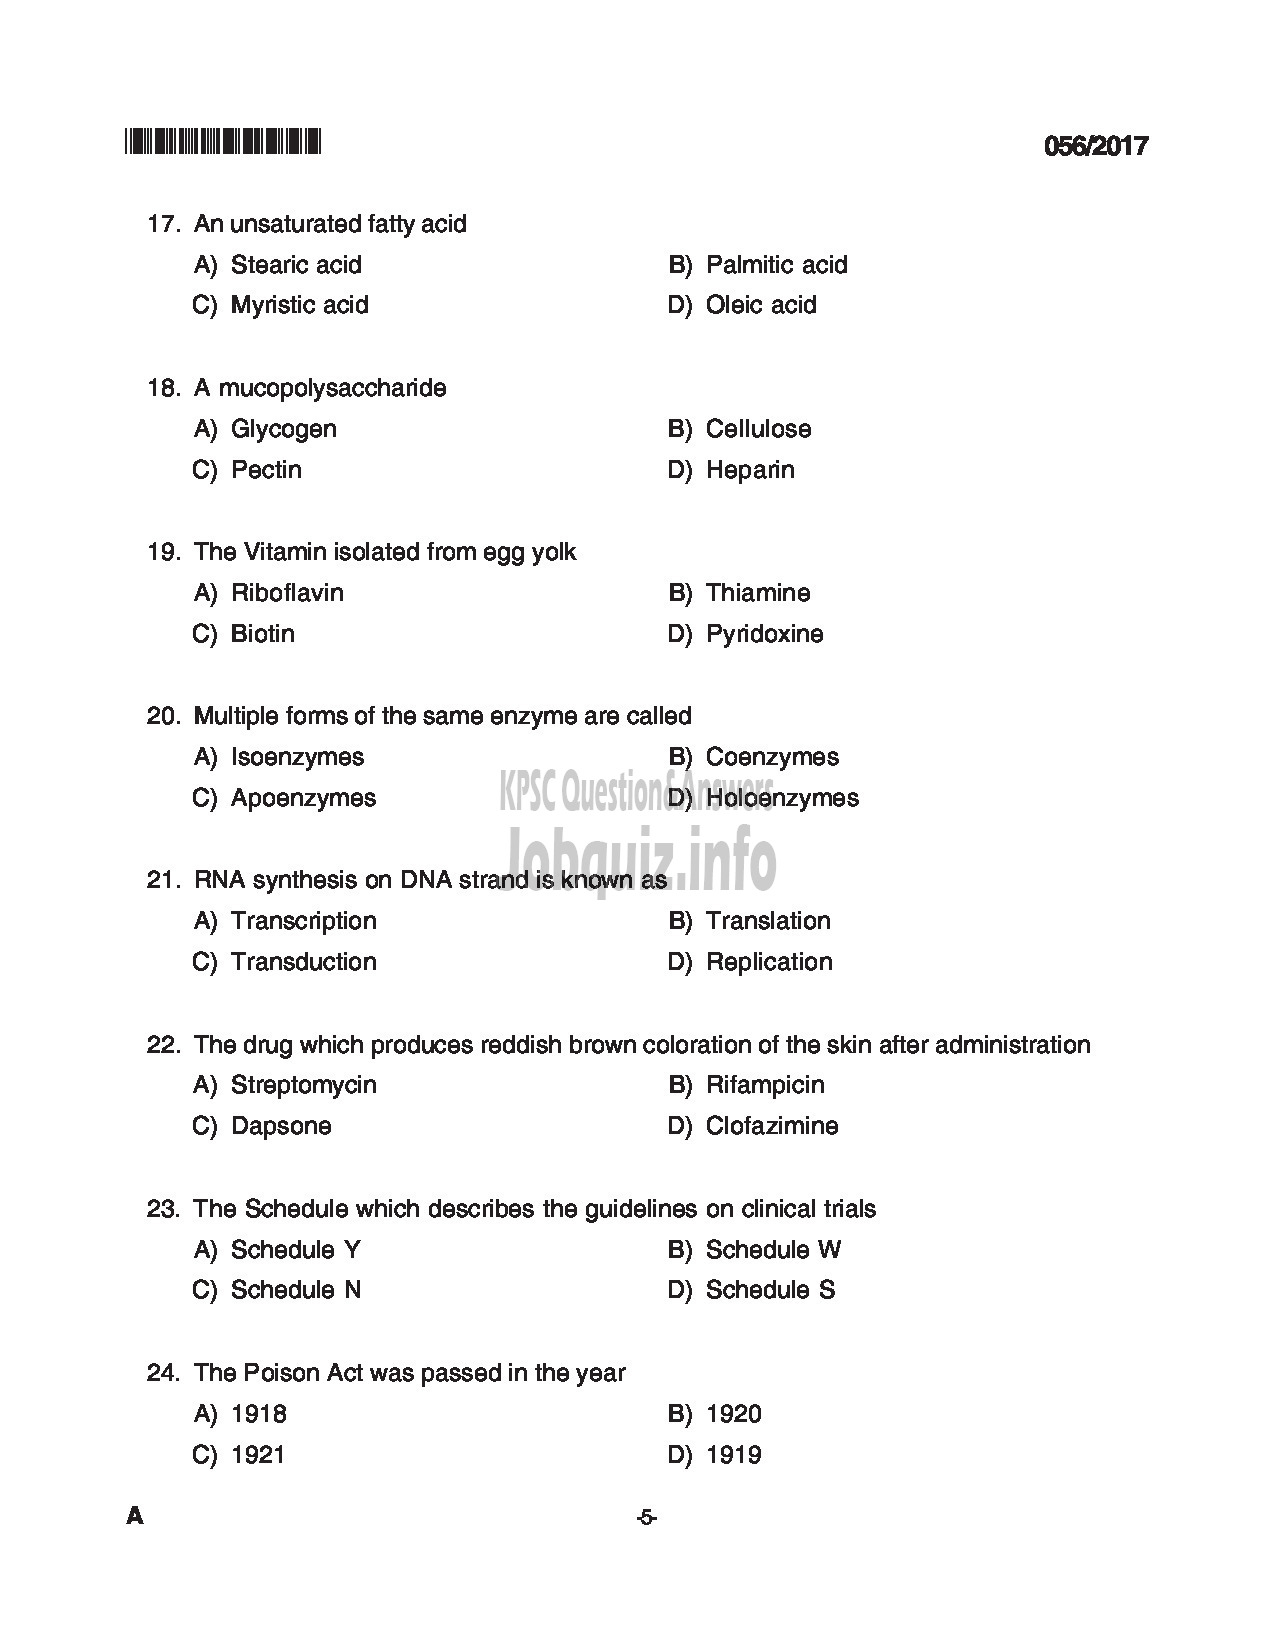 Kerala PSC Question Paper - PHARMACIST GRADE II INSURANCE MEDICAL SERVICES QUESTION PAPER-5